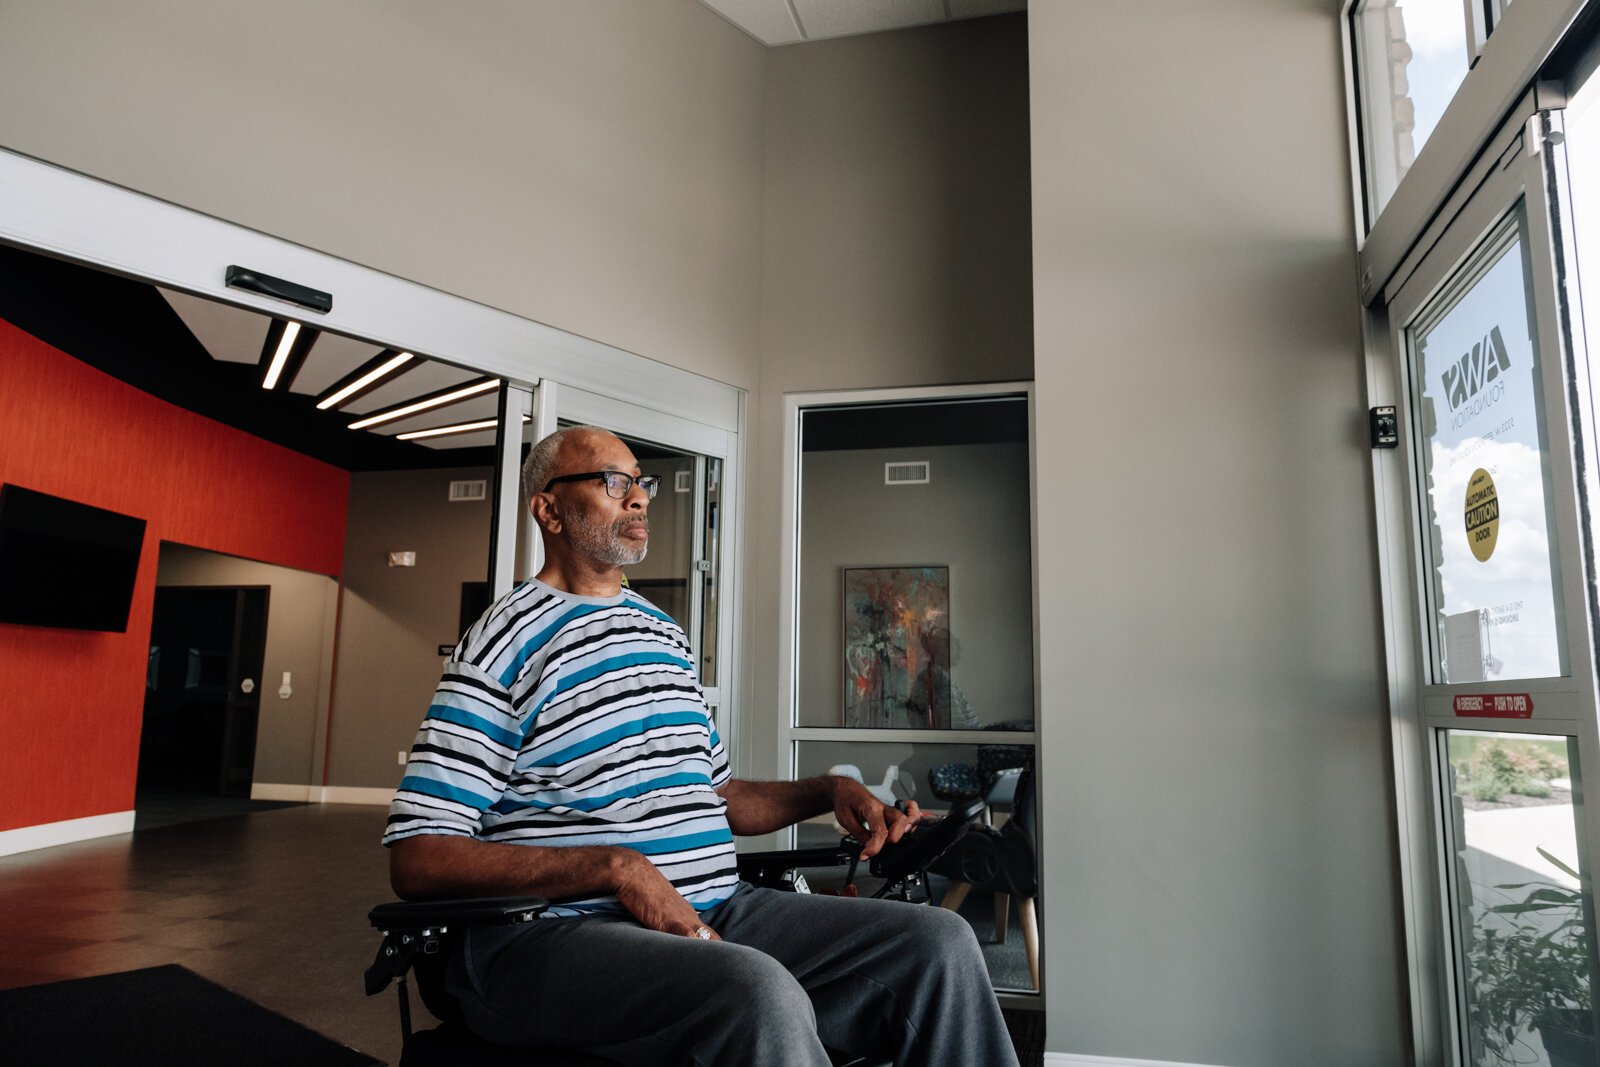 Clif Wallace showcases the extra wide doors suitable for wheelchairs while at the AWS Foundation.